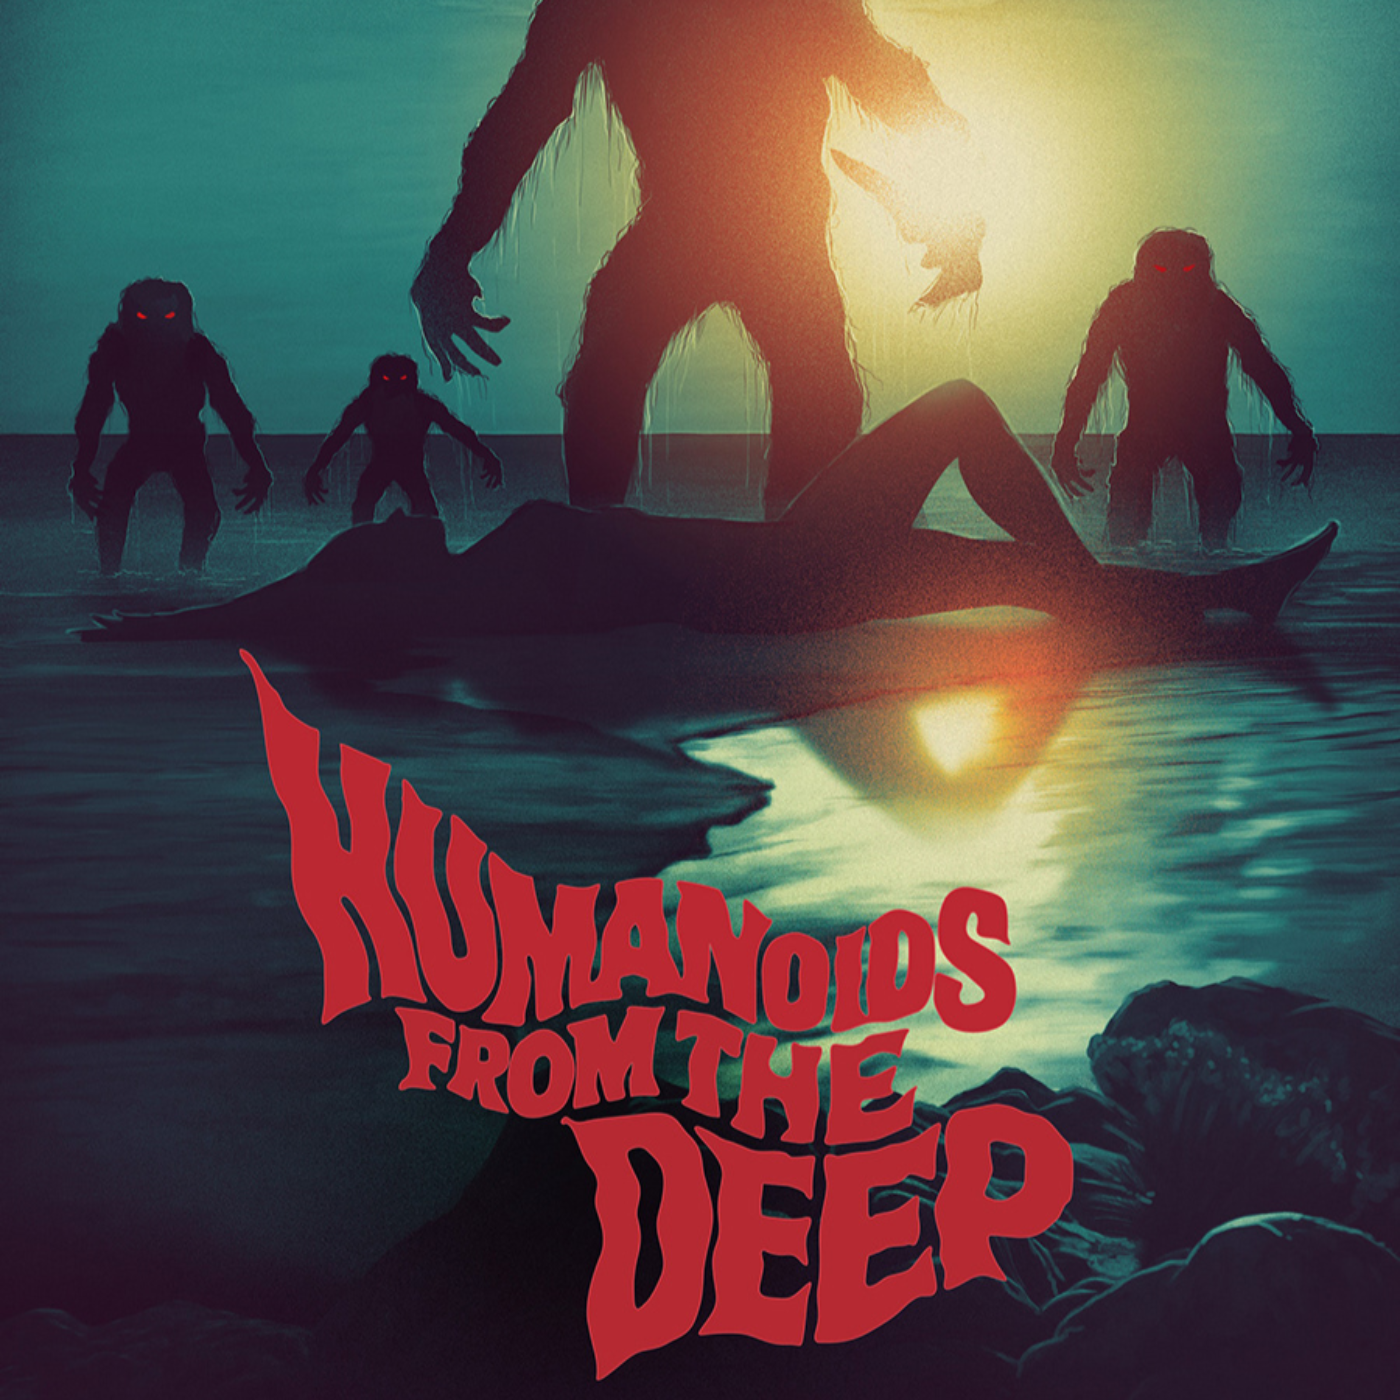 Humanoids from the Deep